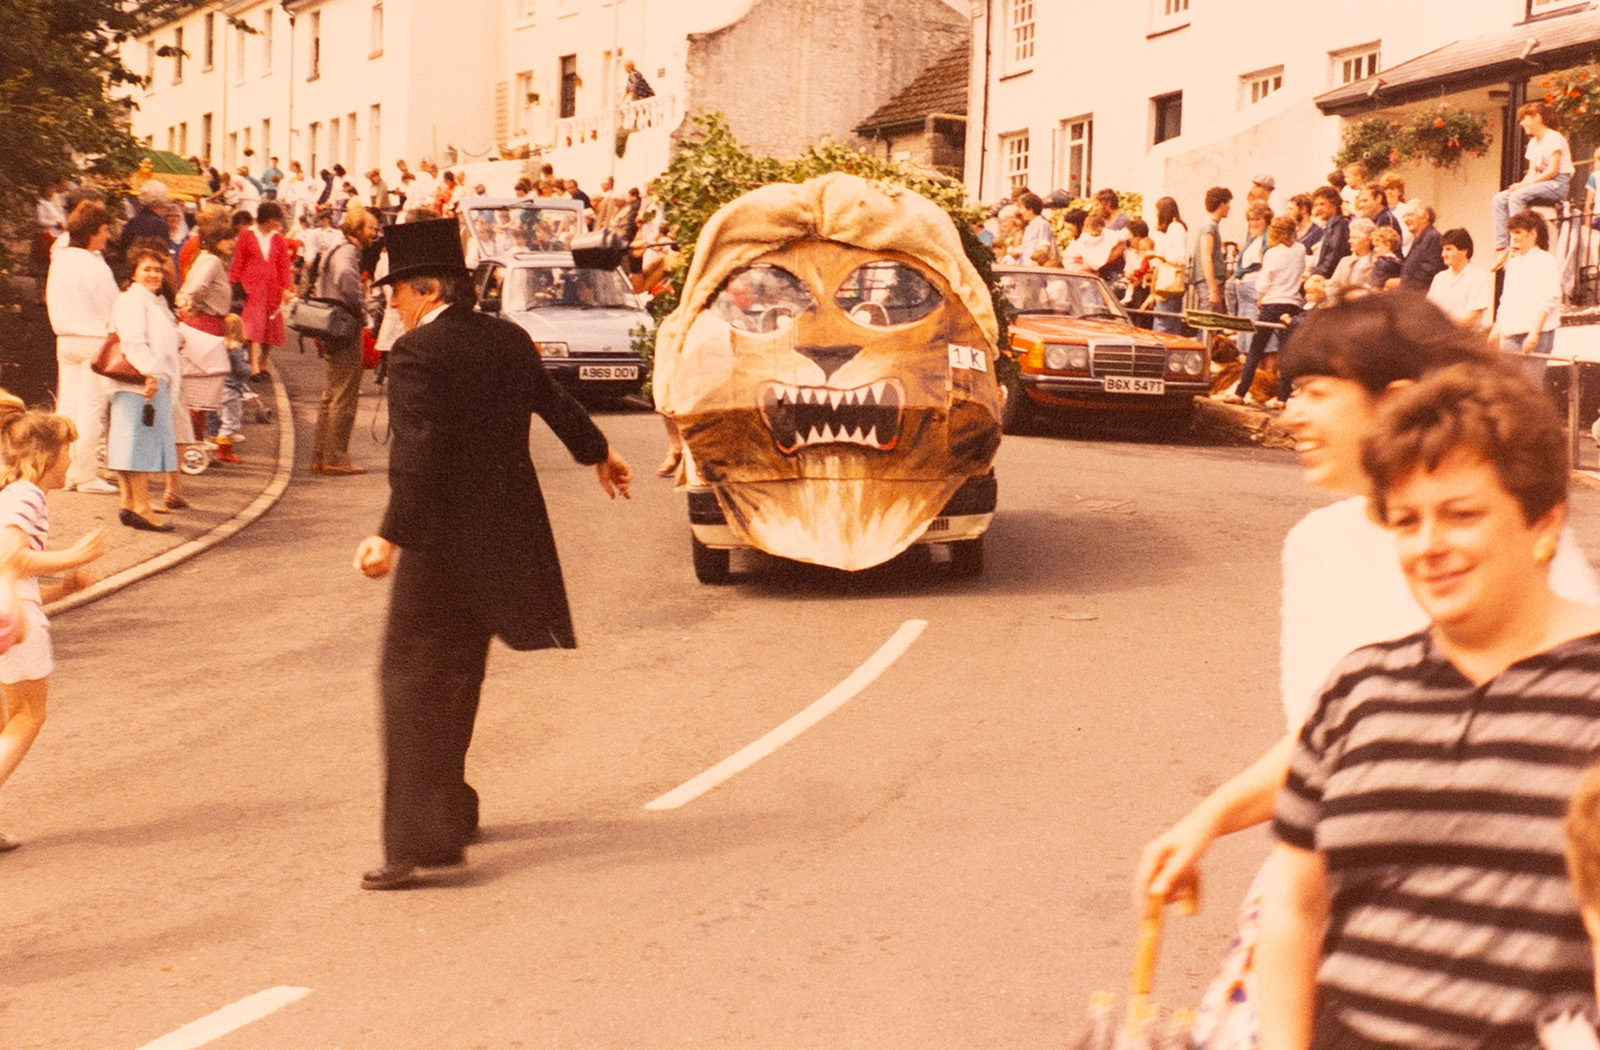 Photograph of the Bishopsteignton Carnival 1970s